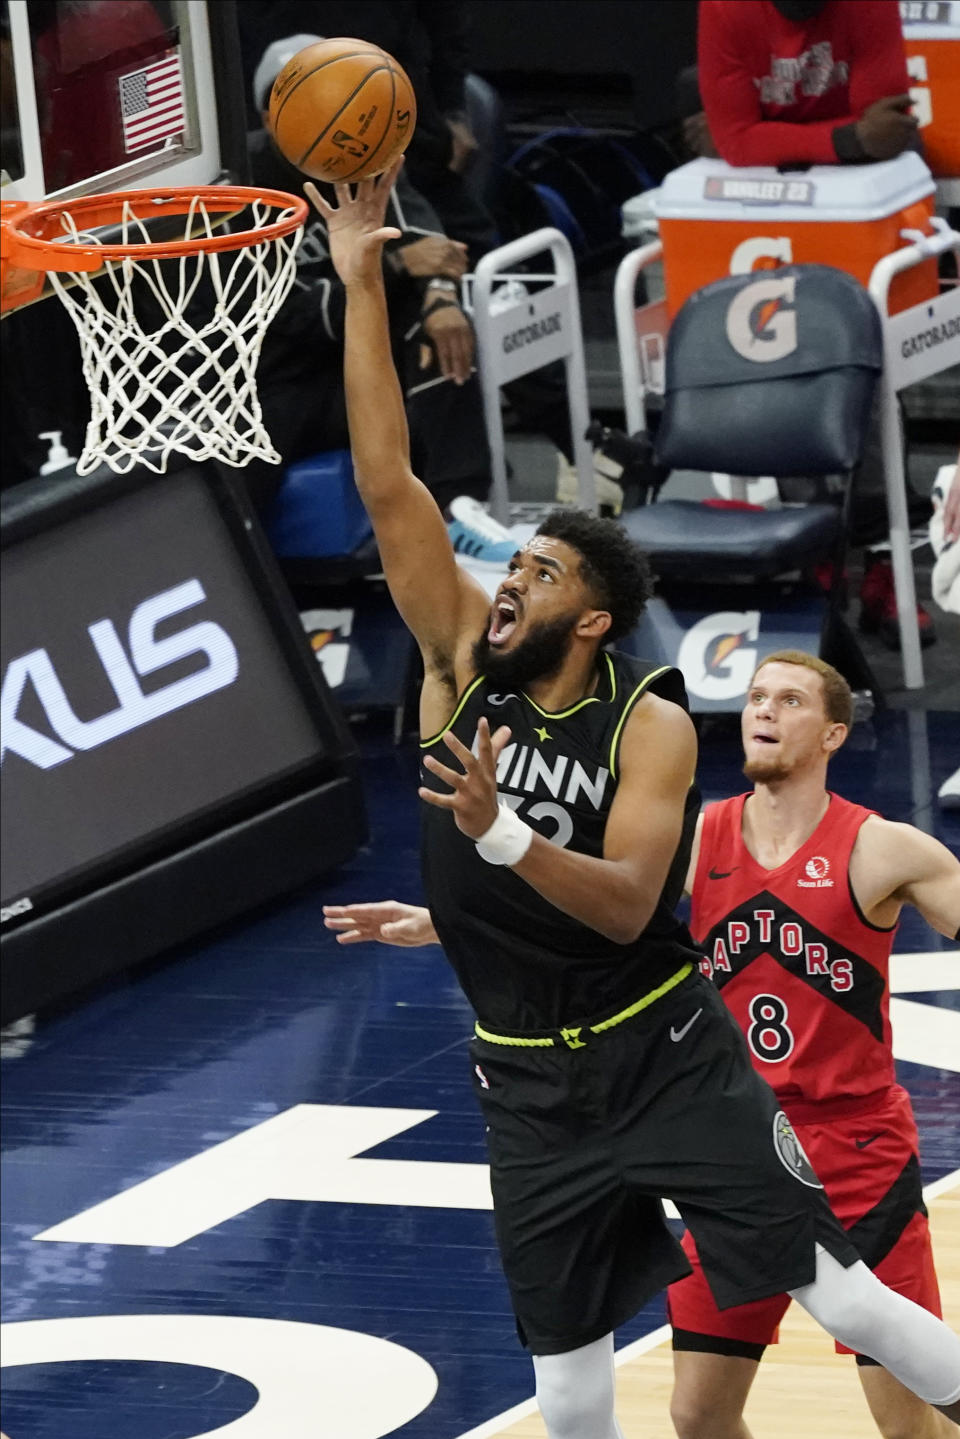 Minnesota Timberwolves' Karl-Anthony Towns (32) lays up a shot as Toronto Raptors' Malachi Flynn (8) watches during the second half of an NBA basketball game Friday, Feb. 19, 2021, in Minneapolis. (AP Photo/Jim Mone)